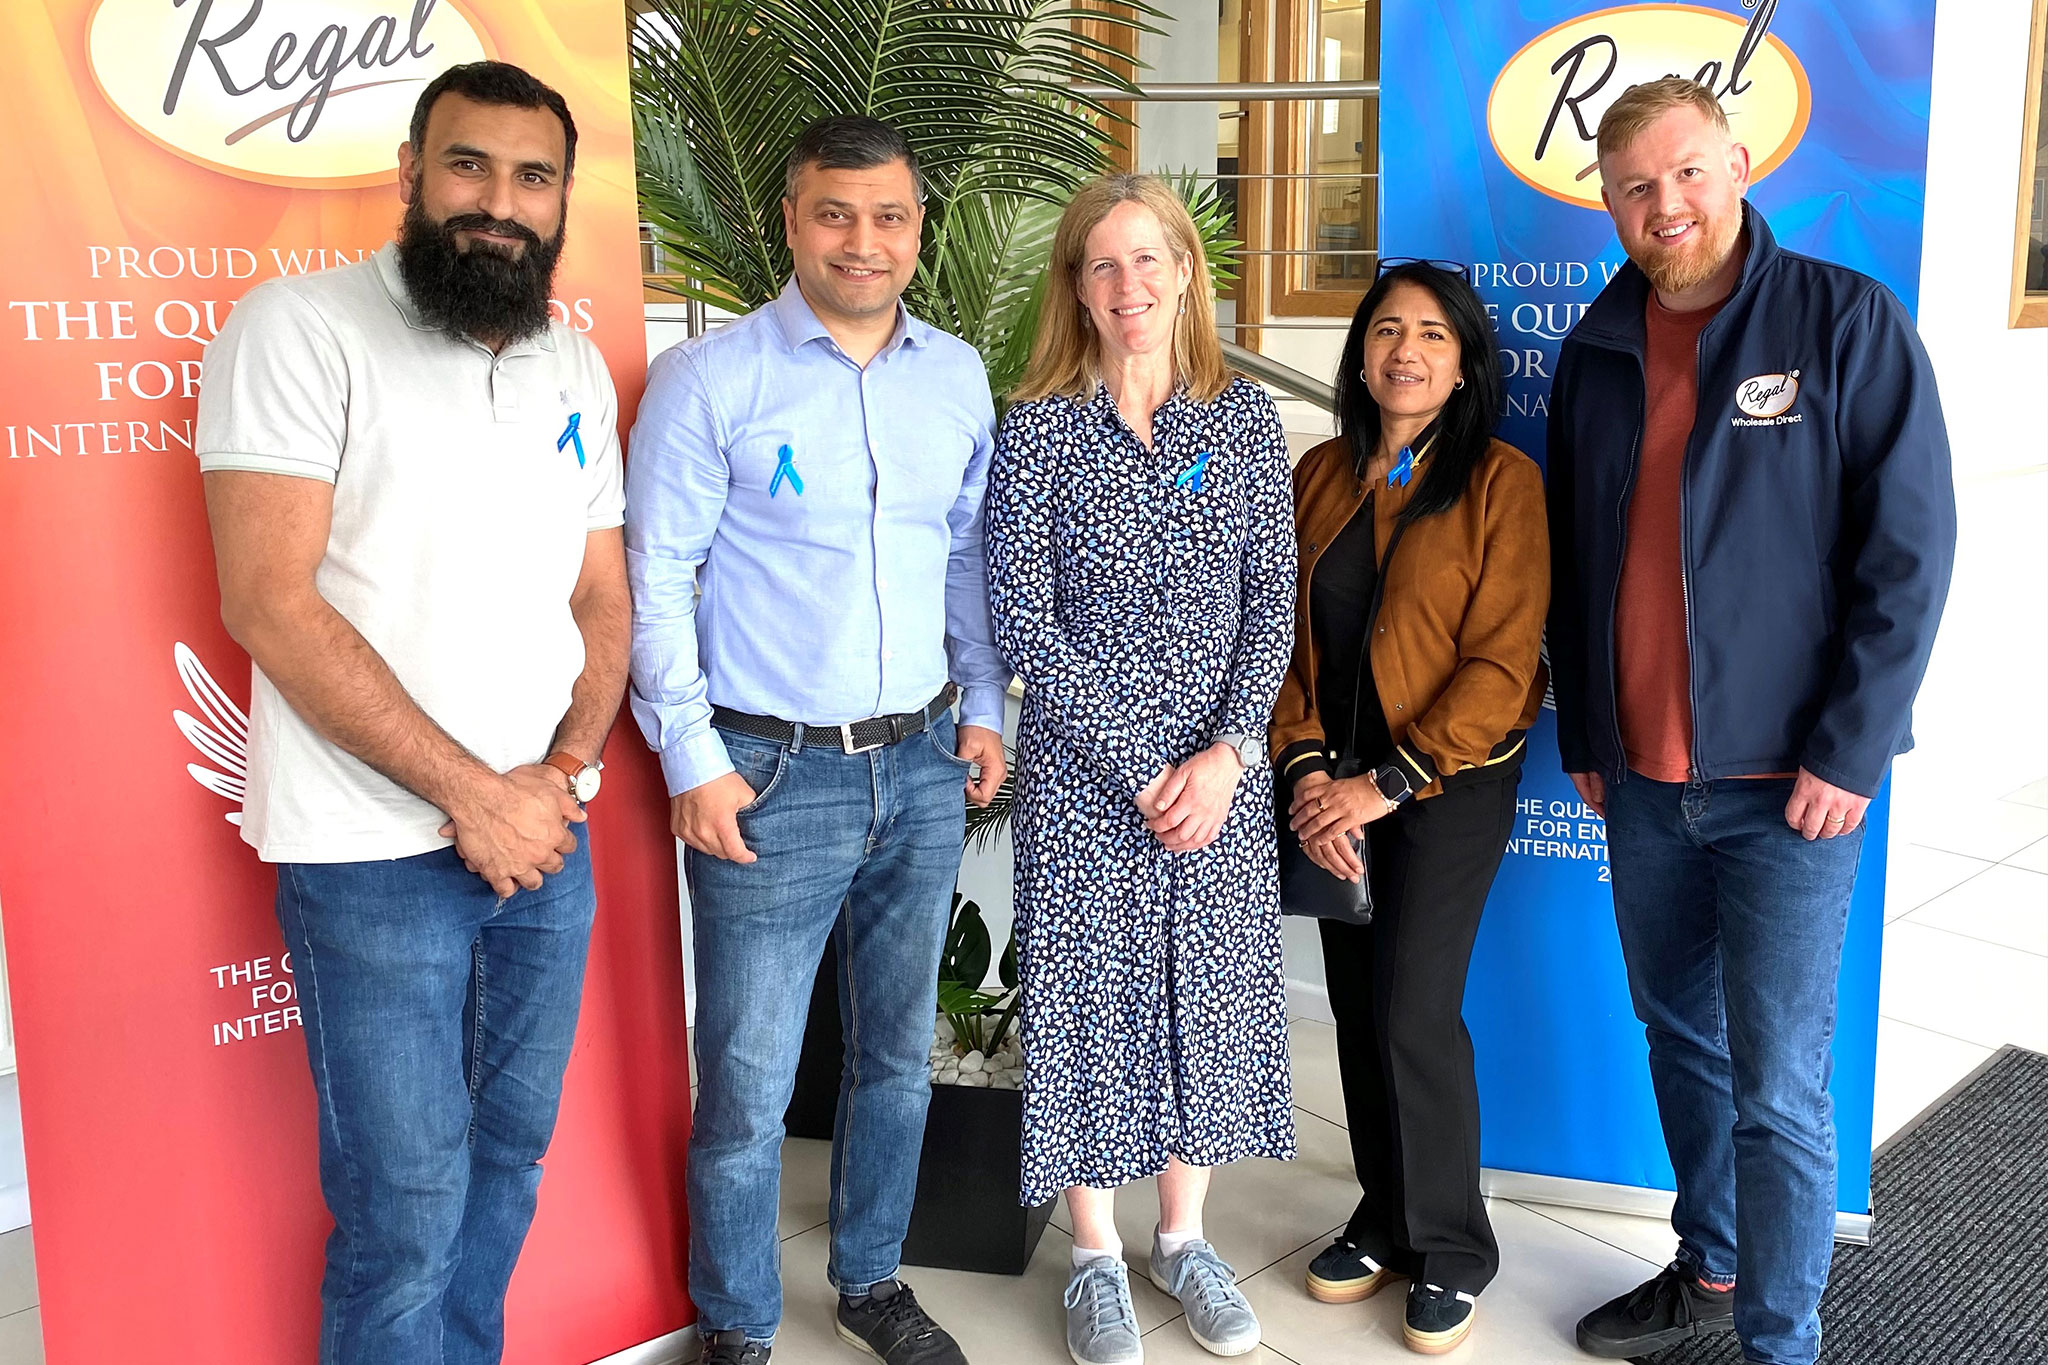 On World Refugee Day, Regal Food Products Group Plc were delighted to be visited by UK for UNCHR’s CEO Emma Chernaiasky and Advisory Board Member Nyra Mahmood, to discuss our CSR work both on a national and international level – an area of our business that we are so very passionate about.